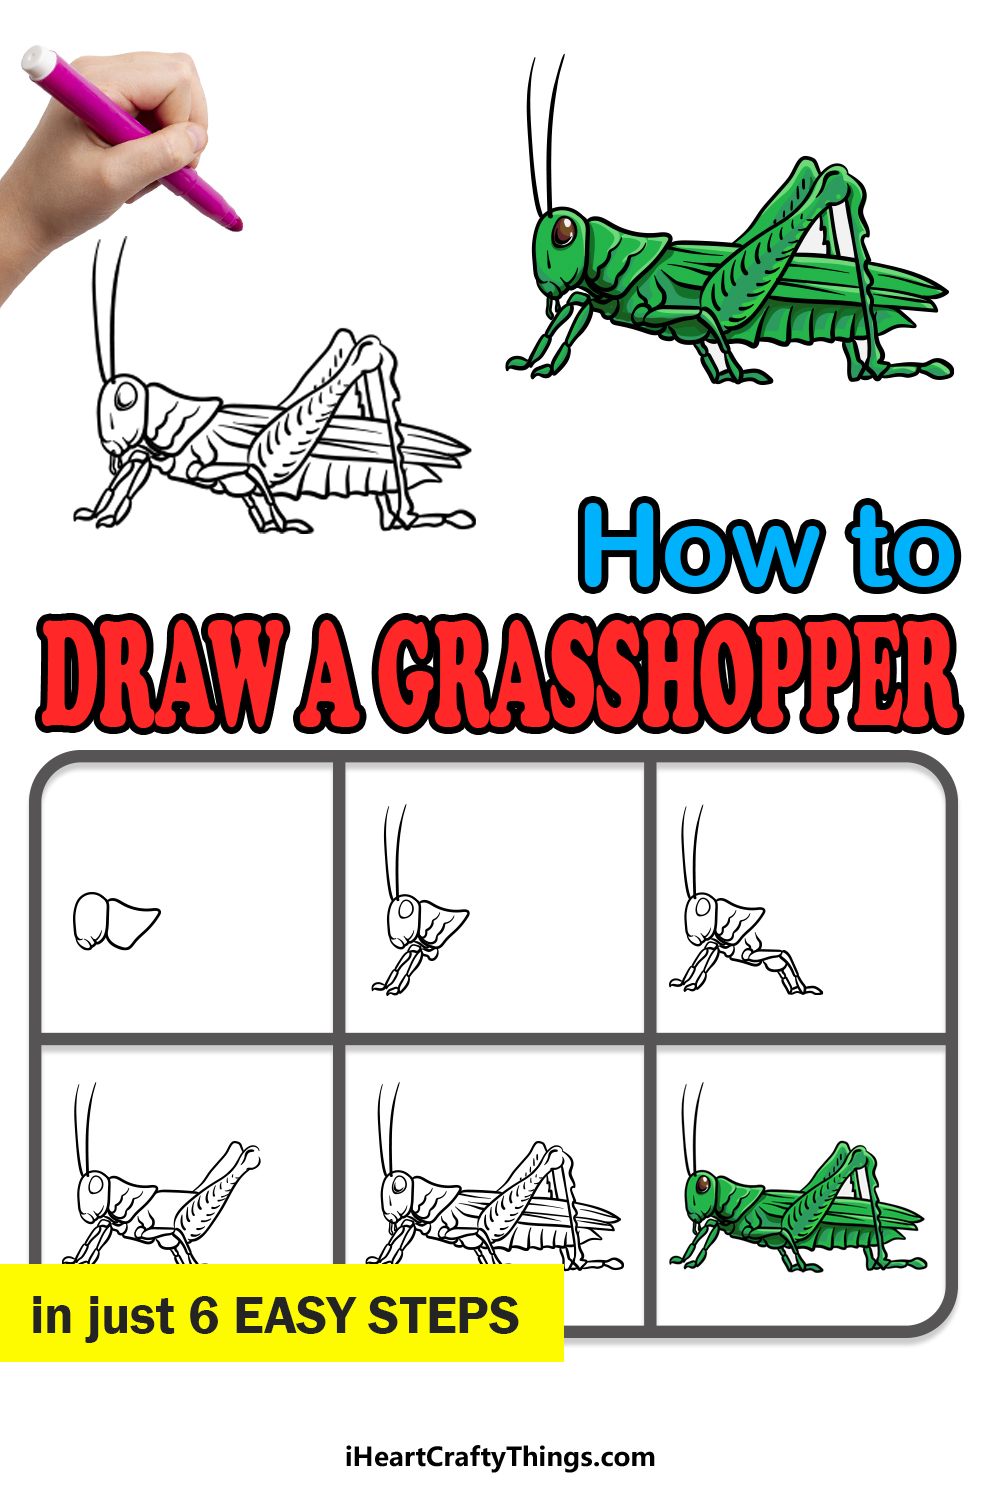 how to draw a grasshopper in 6 easy steps